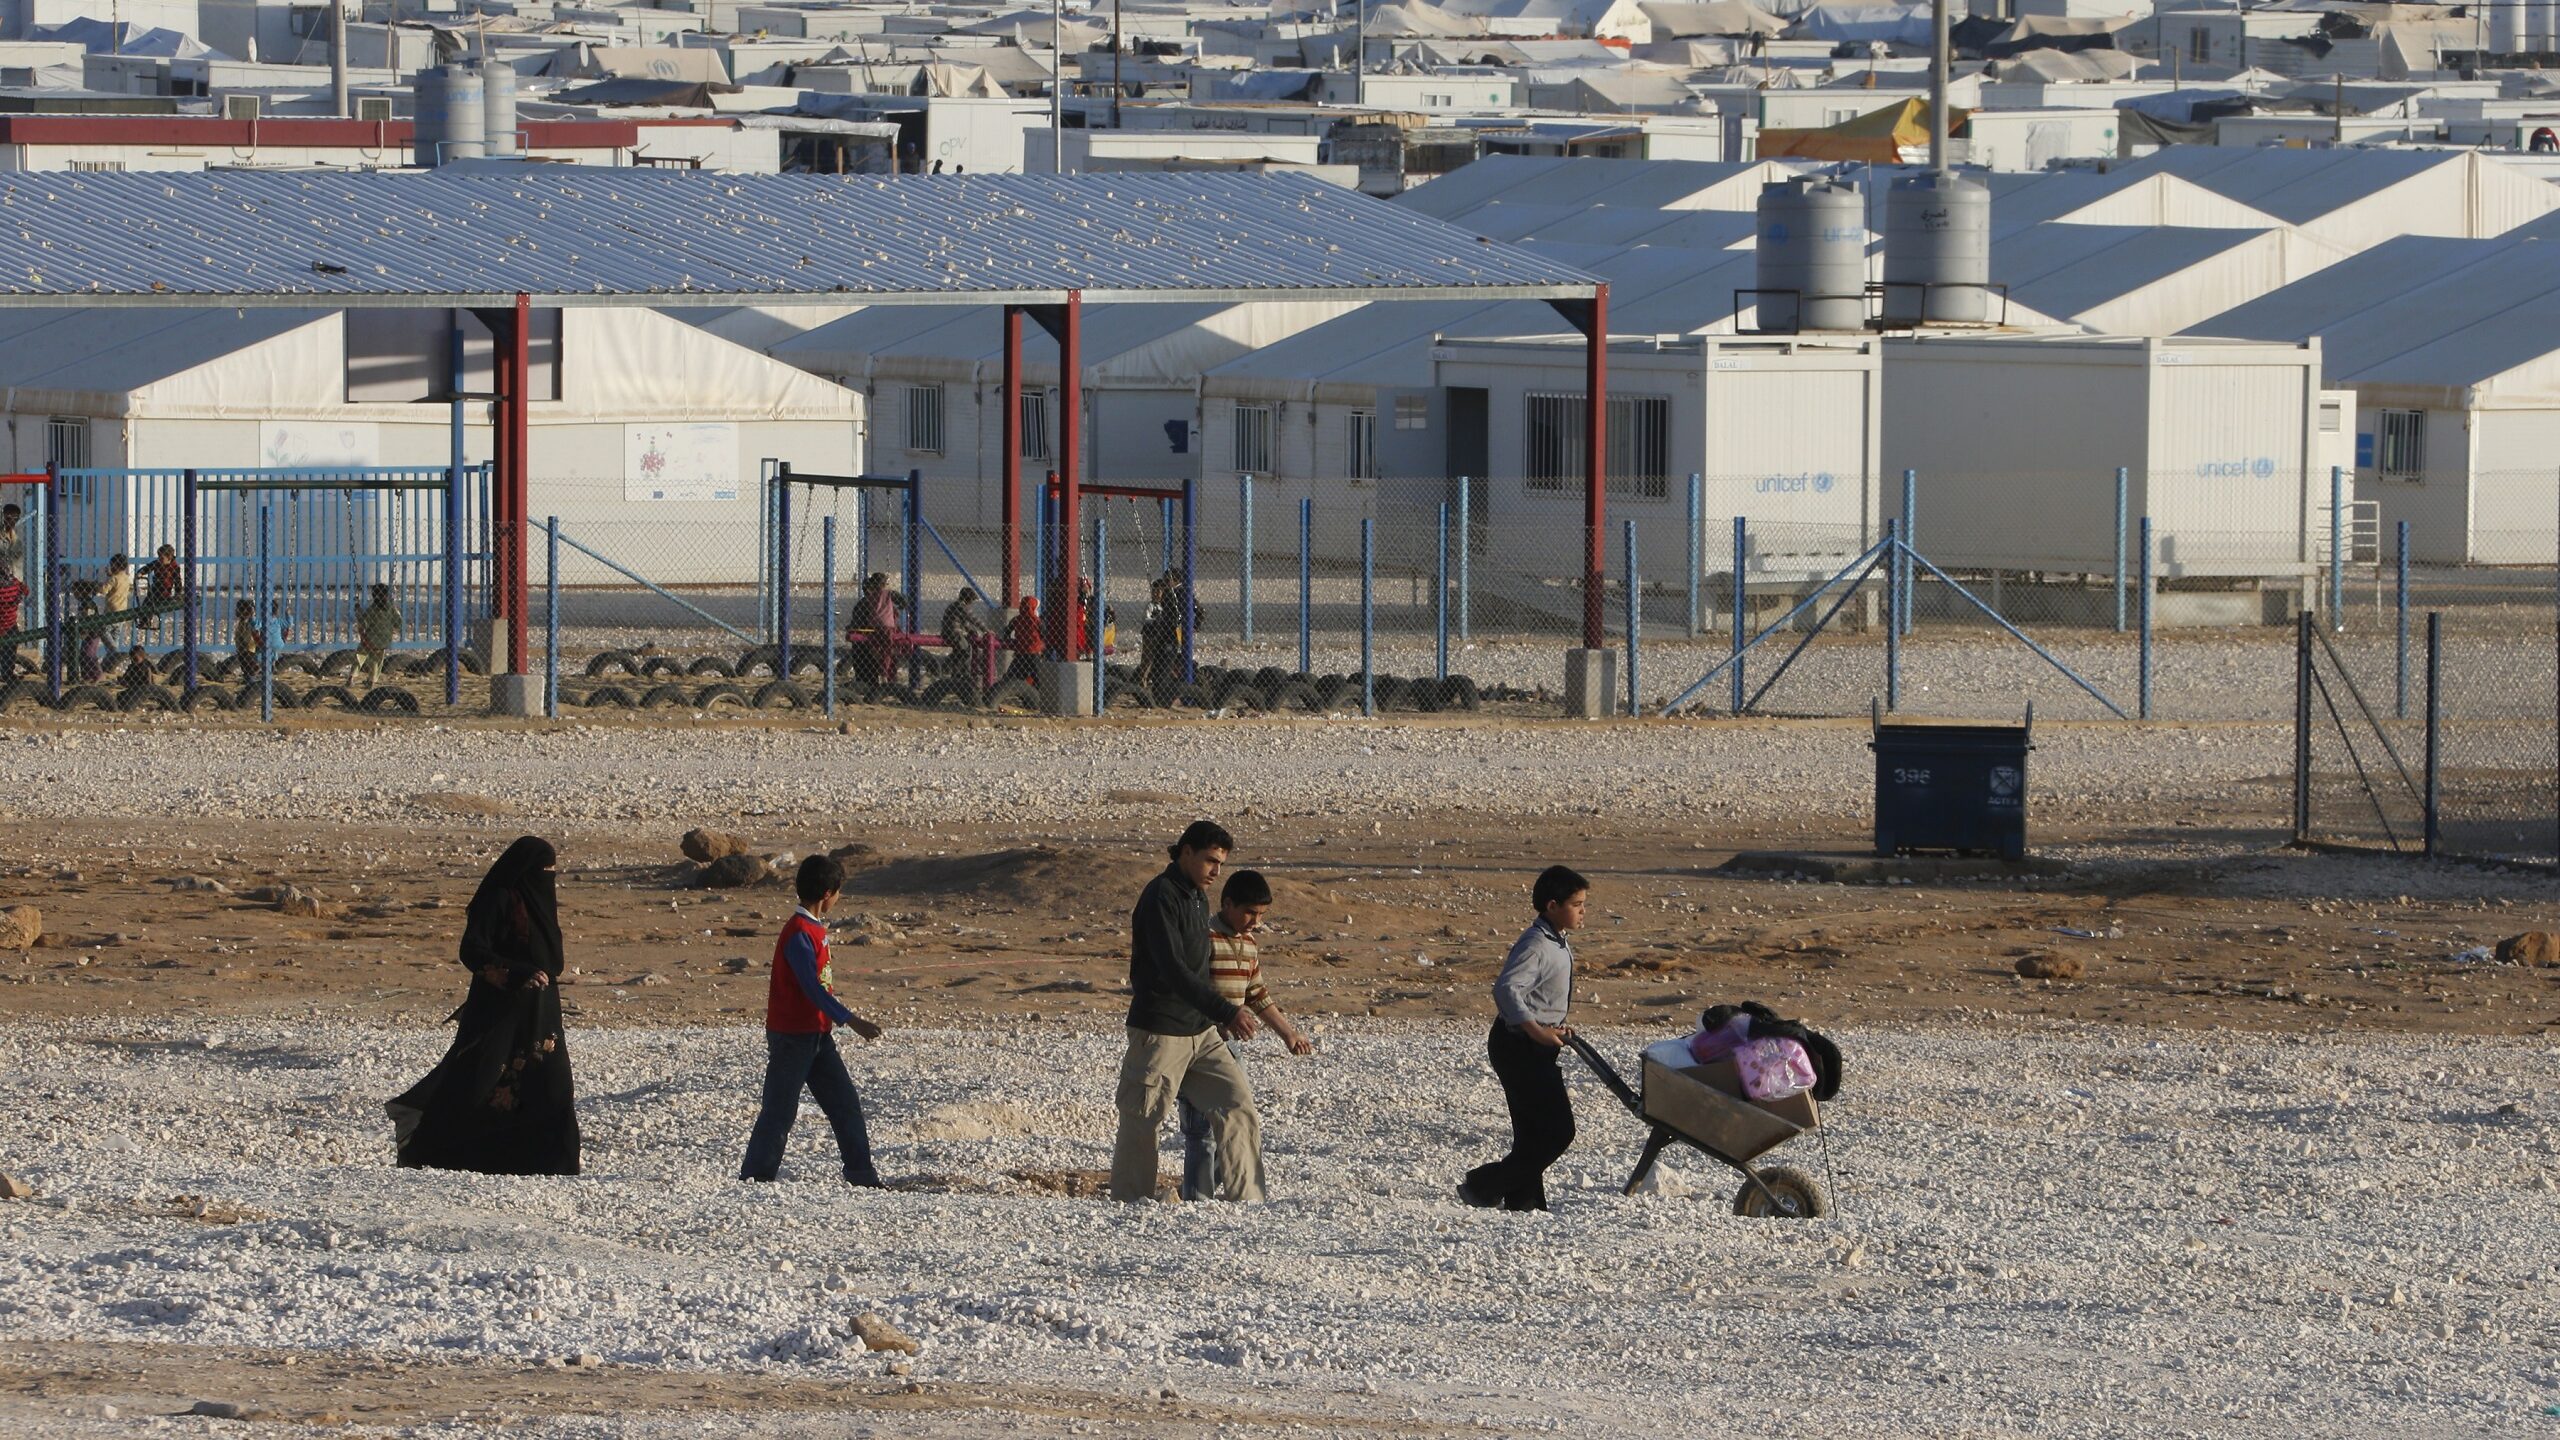 Jordan Calls for Immediate Action To Facilitate Syrian Refugees’ Return